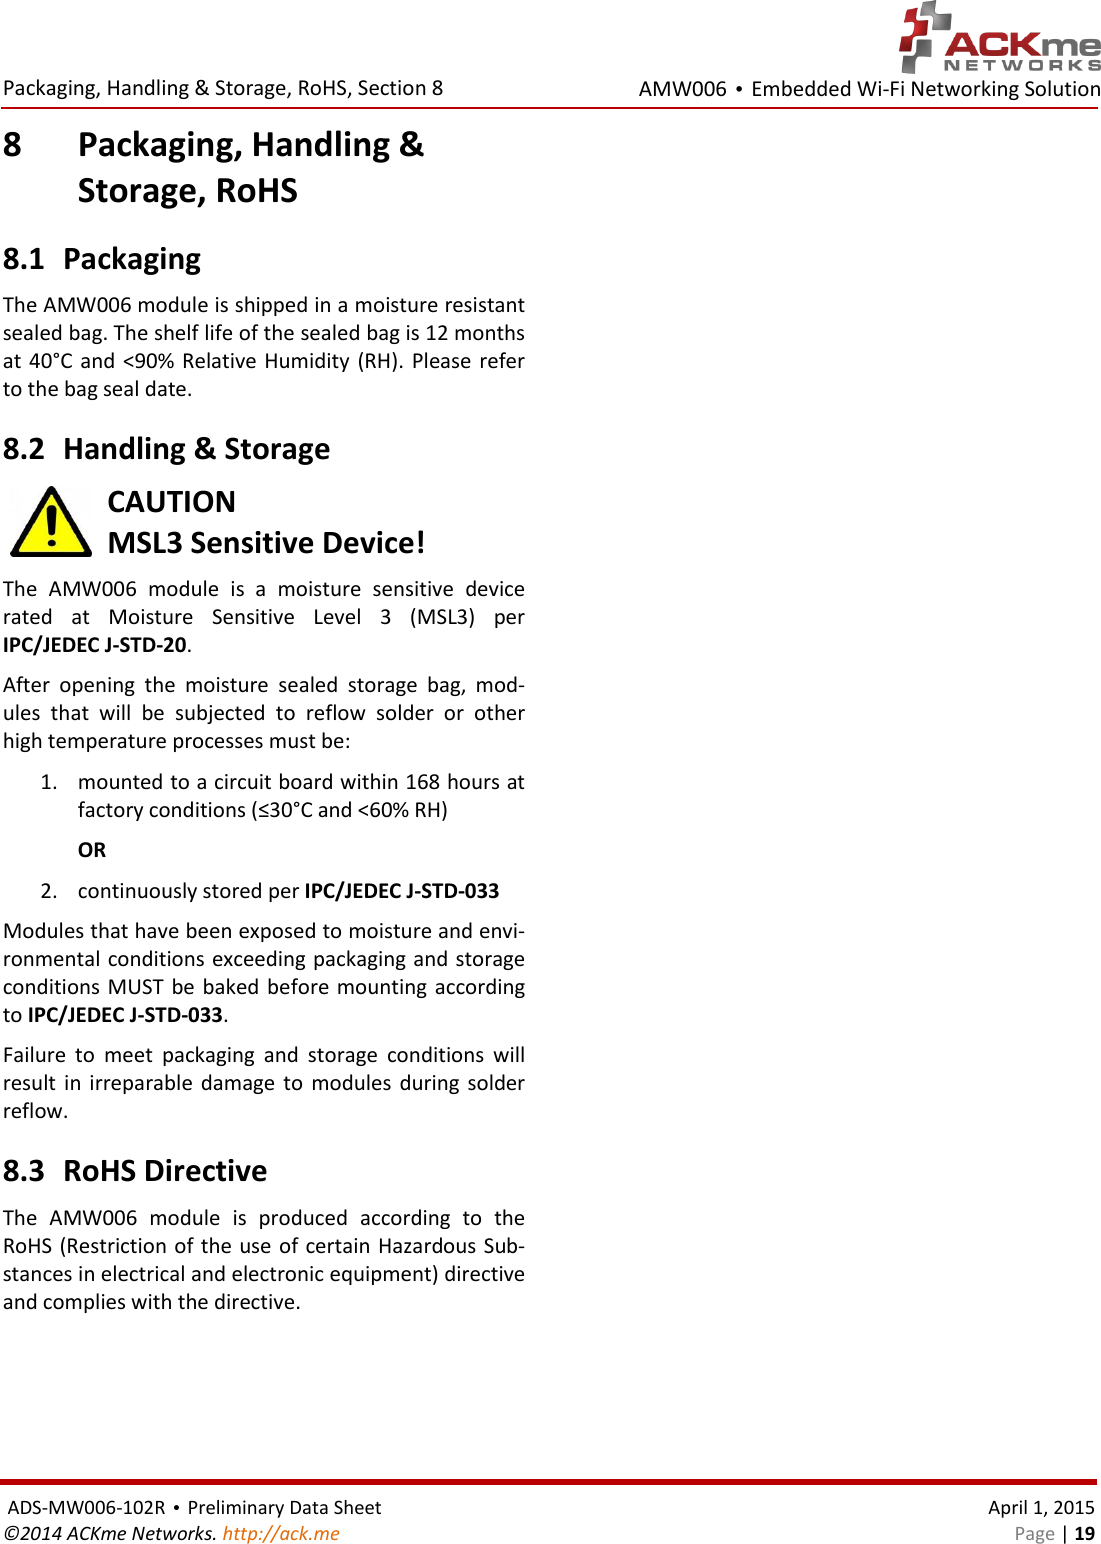 AMW006 • Embedded Wi-Fi Networking Solution  Packaging, Handling &amp; Storage, RoHS, Section 8    ADS-MW006-102R • Preliminary Data Sheet    April 1, 2015 ©2014 ACKme Networks. http://ack.me    Page | 19 8 Packaging, Handling &amp;  Storage, RoHS 8.1 Packaging The AMW006 module is shipped in a moisture resistant sealed bag. The shelf life of the sealed bag is 12 months at 40°C  and  &lt;90%  Relative  Humidity  (RH).  Please refer to the bag seal date.  8.2 Handling &amp; Storage CAUTION MSL3 Sensitive Device! The  AMW006  module  is  a  moisture  sensitive  device rated  at  Moisture  Sensitive  Level  3  (MSL3)  per IPC/JEDEC J-STD-20.  After  opening  the  moisture  sealed  storage  bag,  mod-ules  that  will  be  subjected  to  reflow  solder  or  other high temperature processes must be: 1. mounted to a circuit board within 168 hours at factory conditions (≤30°C and &lt;60% RH) OR 2. continuously stored per IPC/JEDEC J-STD-033 Modules that have been exposed to moisture and envi-ronmental conditions exceeding packaging and storage conditions MUST be baked before mounting according to IPC/JEDEC J-STD-033.  Failure  to  meet  packaging  and  storage  conditions  will result  in  irreparable damage  to  modules  during solder reflow. 8.3 RoHS Directive The  AMW006  module  is  produced  according  to  the RoHS (Restriction of the use of certain Hazardous Sub-stances in electrical and electronic equipment) directive and complies with the directive.   